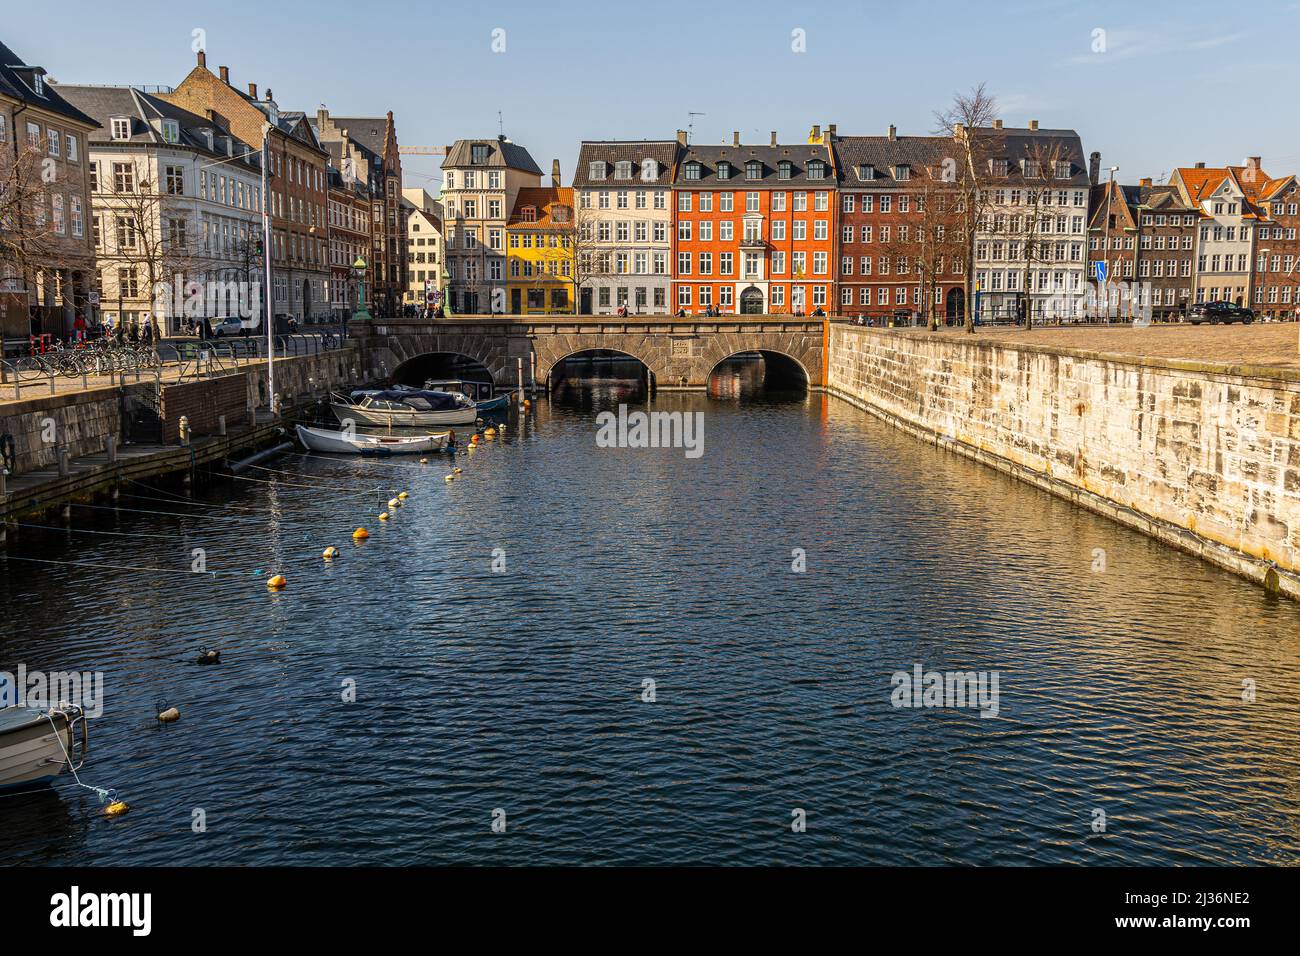 Colorful facades of typical houses in the old town of Copenhagen. In the foreground, the navigable canal that flows under the Storm Bridge. Denmark Stock Photo